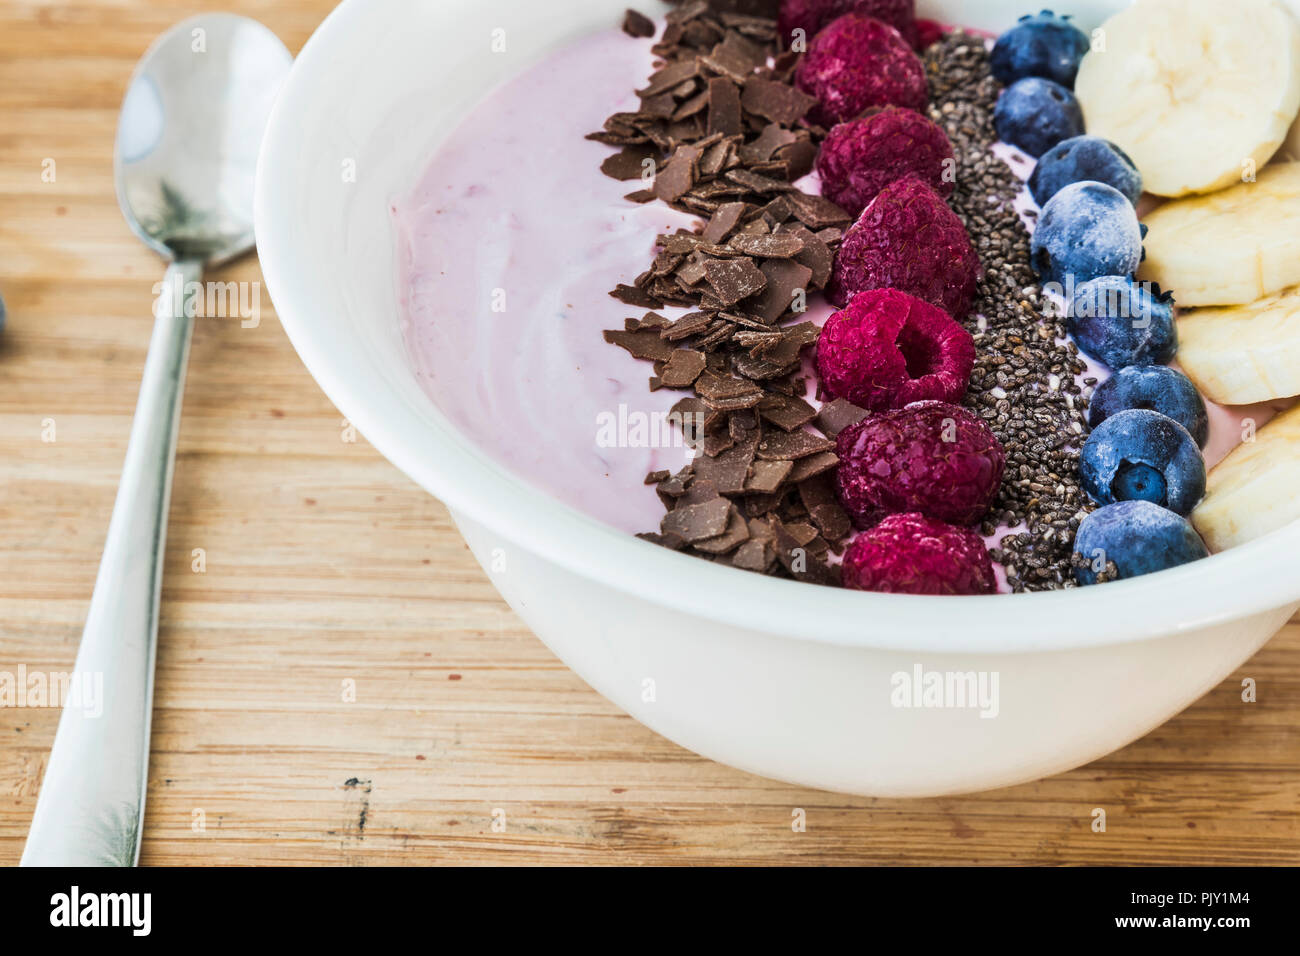 https://c8.alamy.com/comp/PJY1M4/a-smoothie-bowl-with-fresh-berries-banana-chia-seeds-and-chocolate-for-healthy-vegan-and-vegetarian-diet-breakfast-PJY1M4.jpg